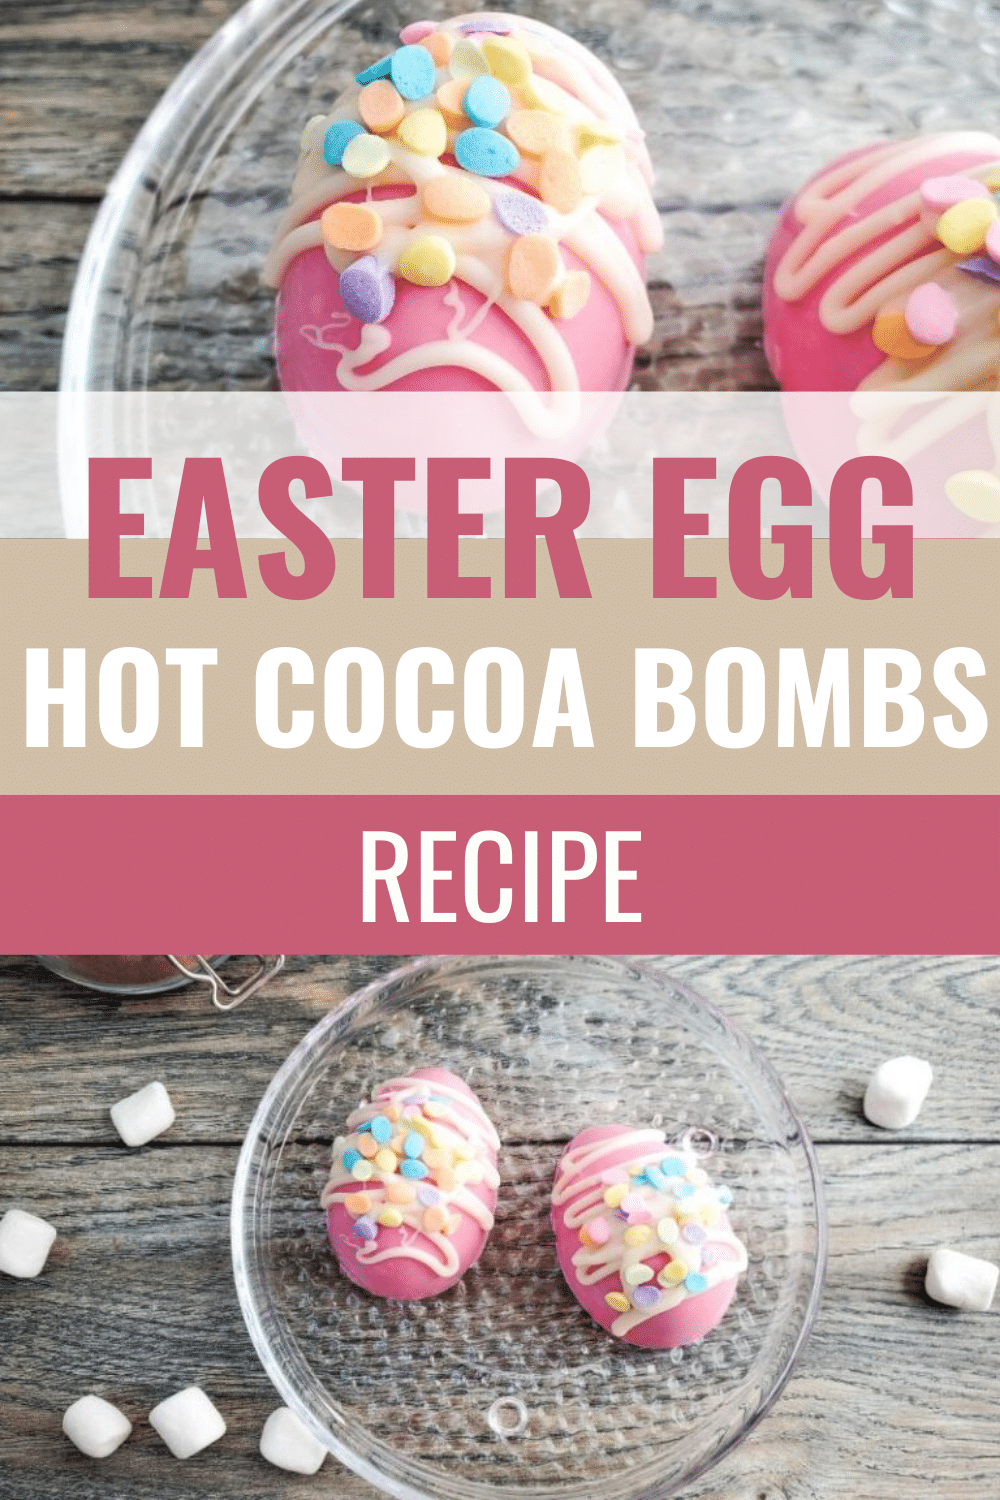 These Easter Egg Hot Cocoa Bombs make a fun and tasty addition to any Easter basket. Sweet, colorful, and festive! #easter #hotcocobombs #hotcocoa #easteregg via @wondermomwannab